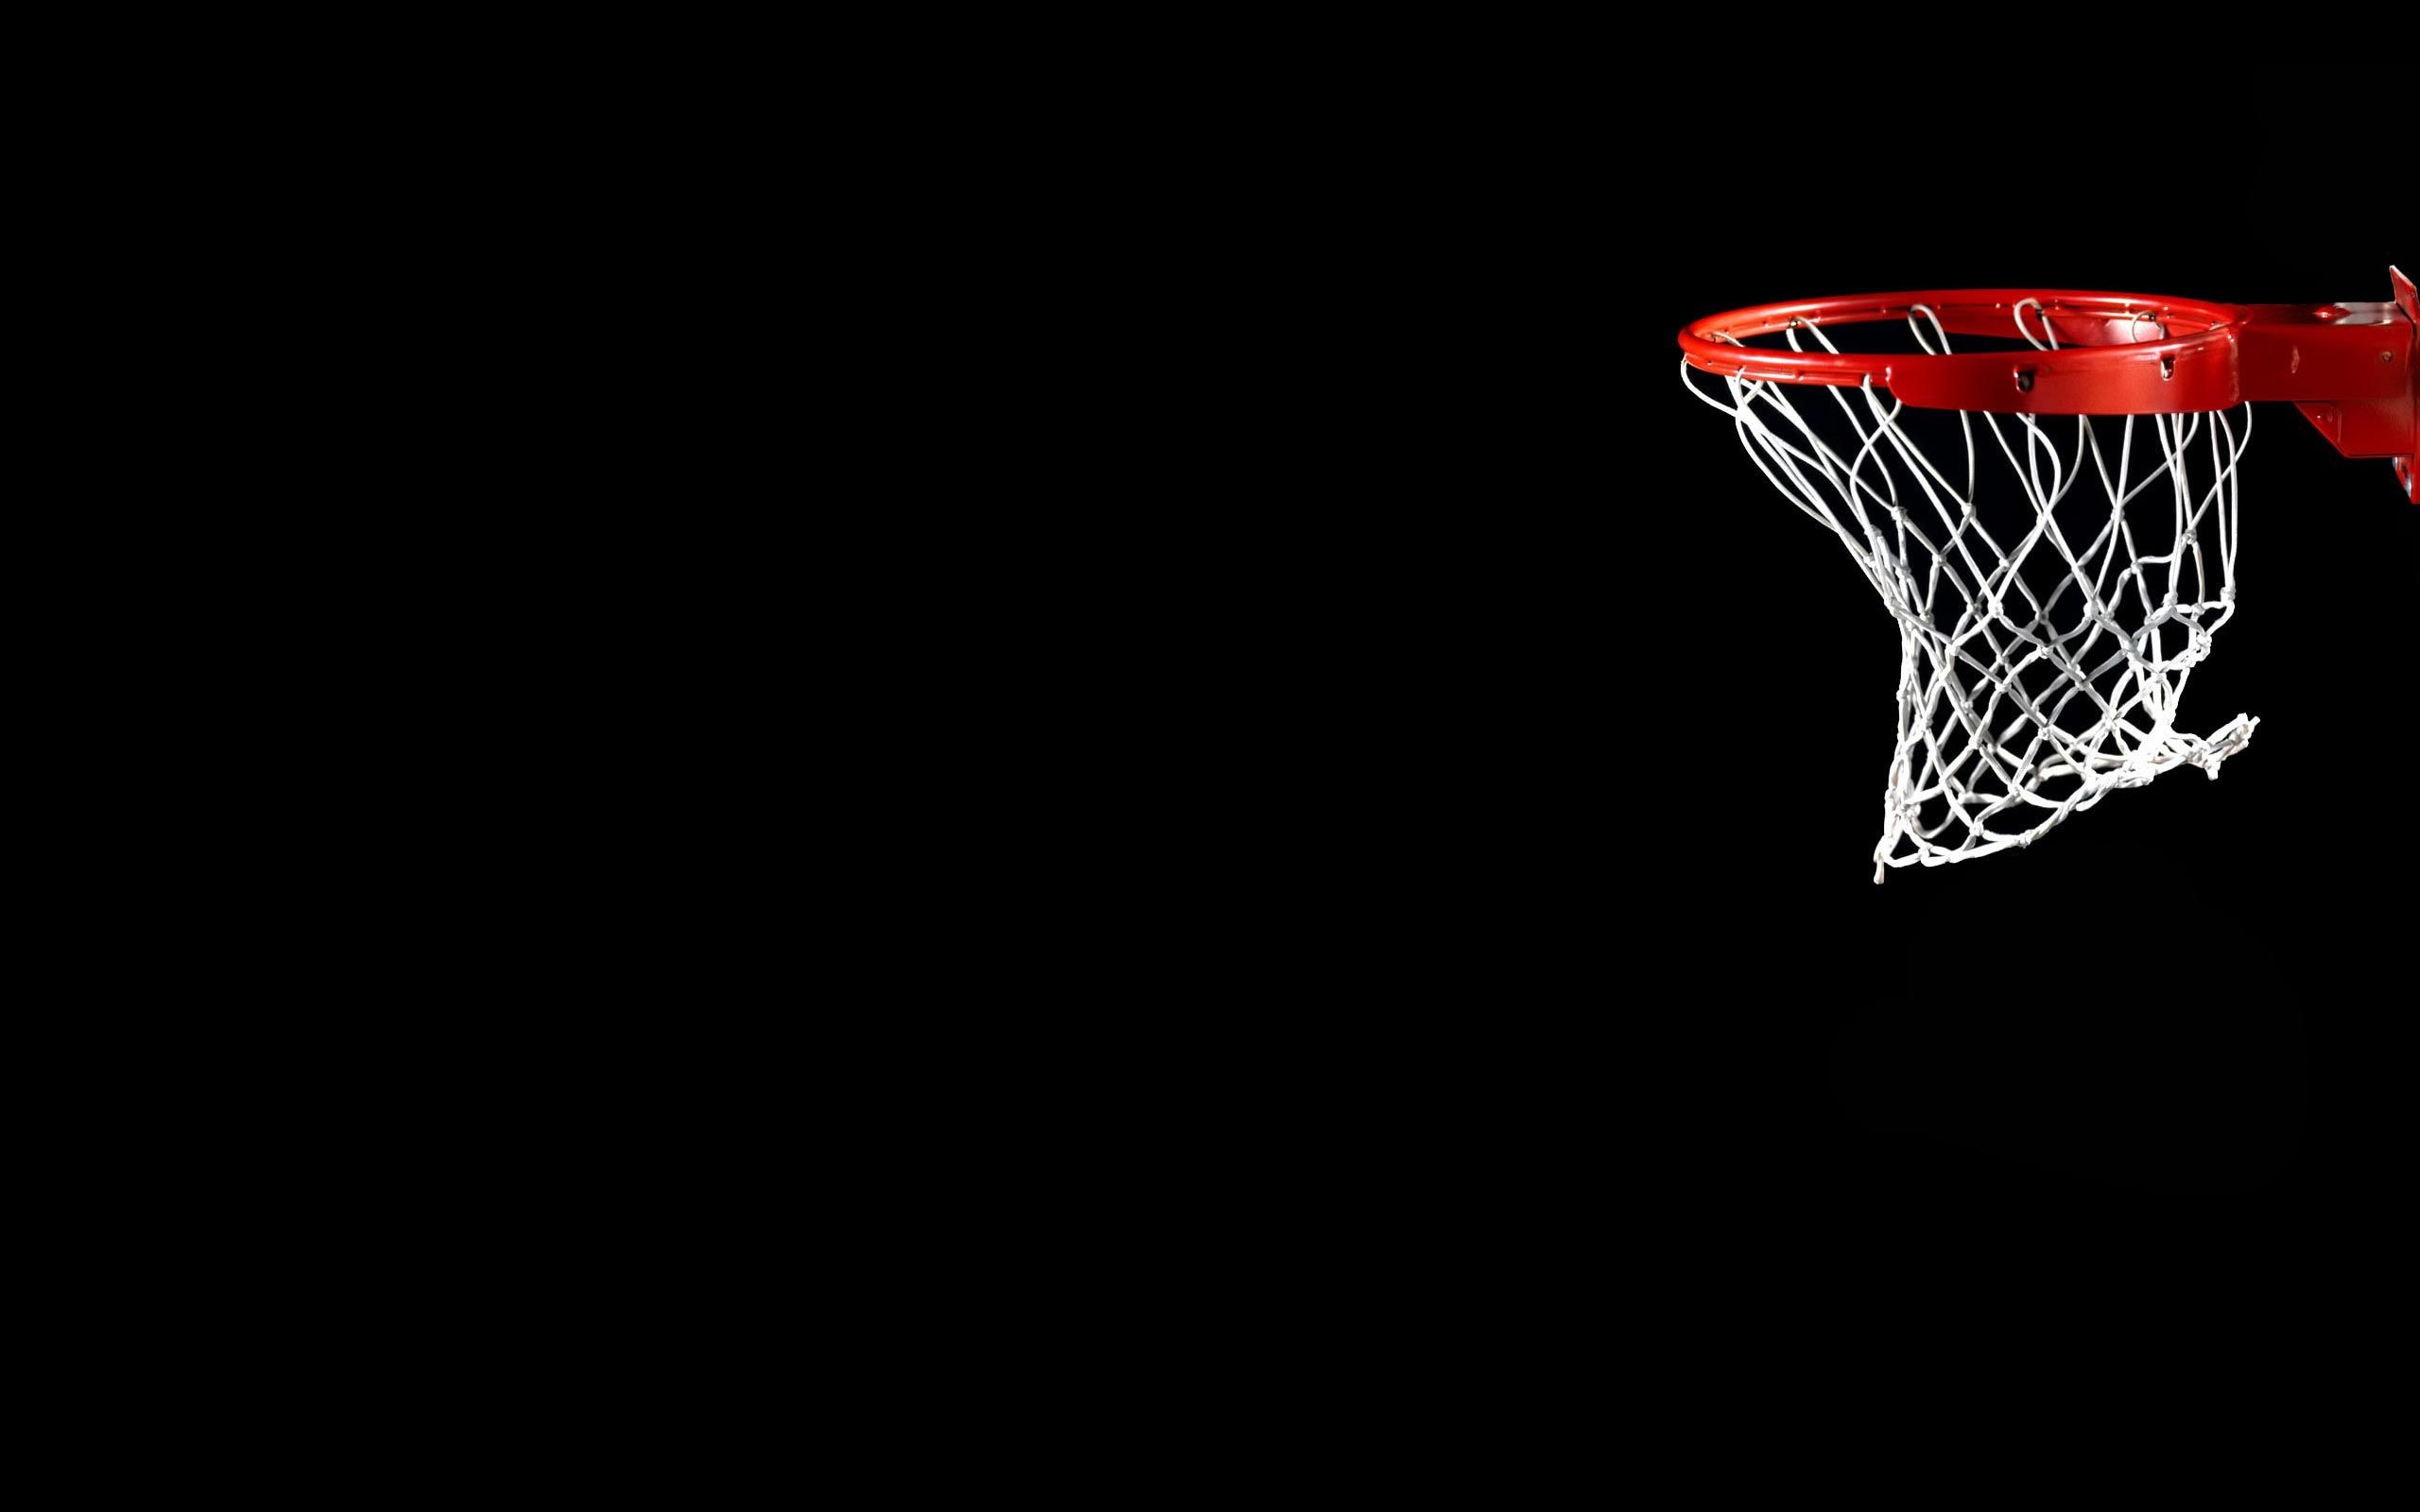 2560x1600 Nike Basketball Wallpaper Picture For Desktop Wallpaper 2560 x 1600 px 1.2  MB just do it